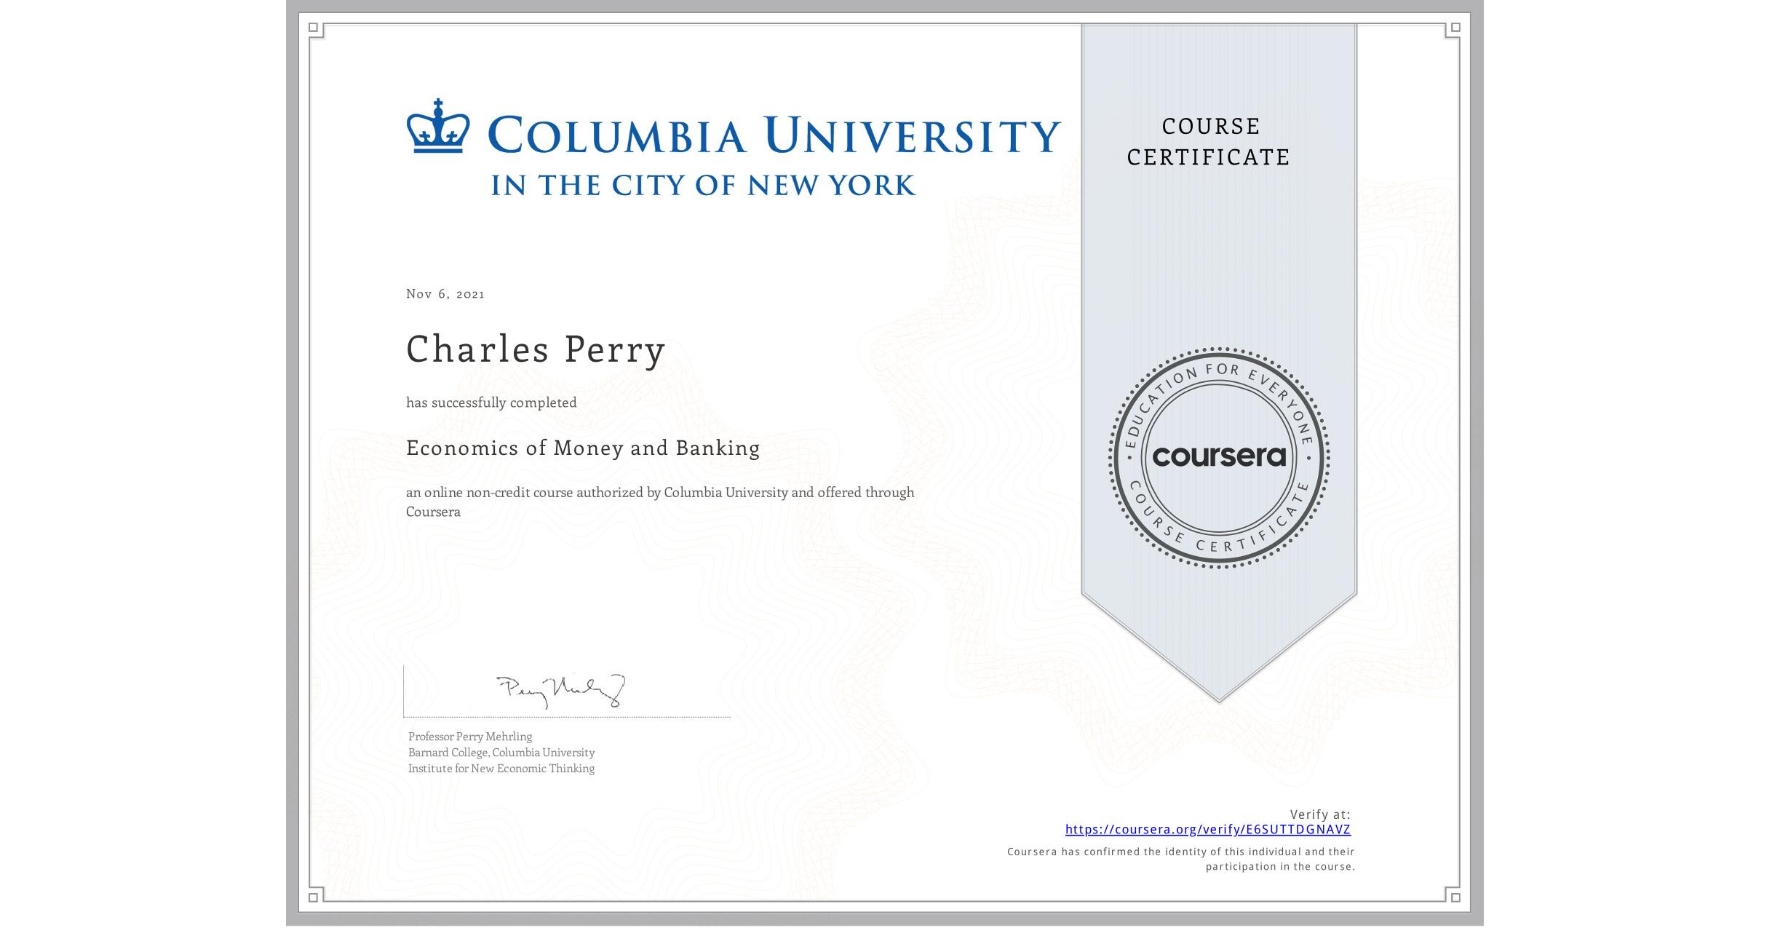 View certificate for Charles Perry, Economics of Money and Banking, an online non-credit course authorized by Columbia University and offered through Coursera